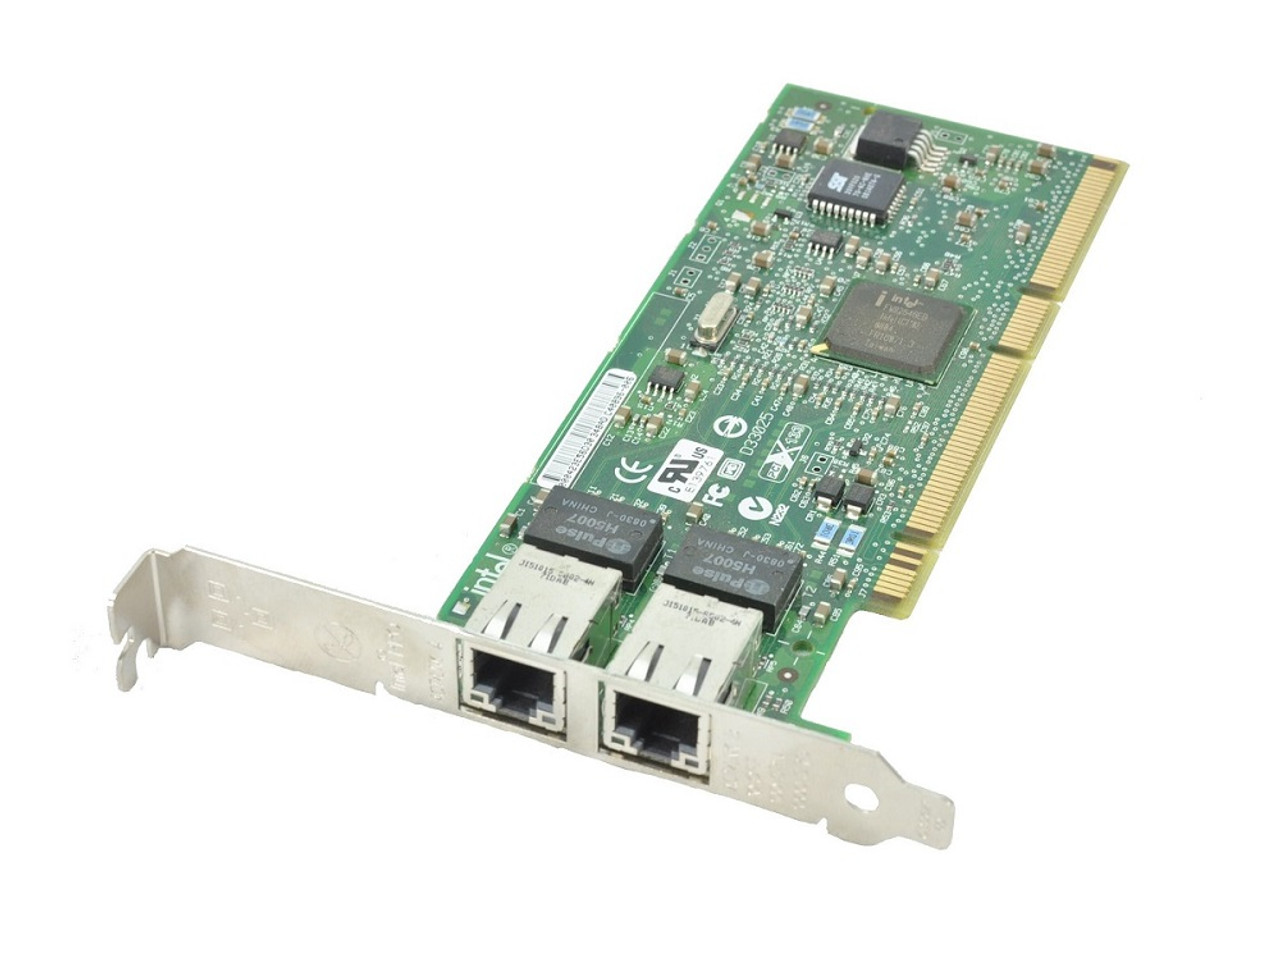 616010-001 - HP Ethernet 1GB 4-Port 366m Adapter Network Adapter 4 Ports